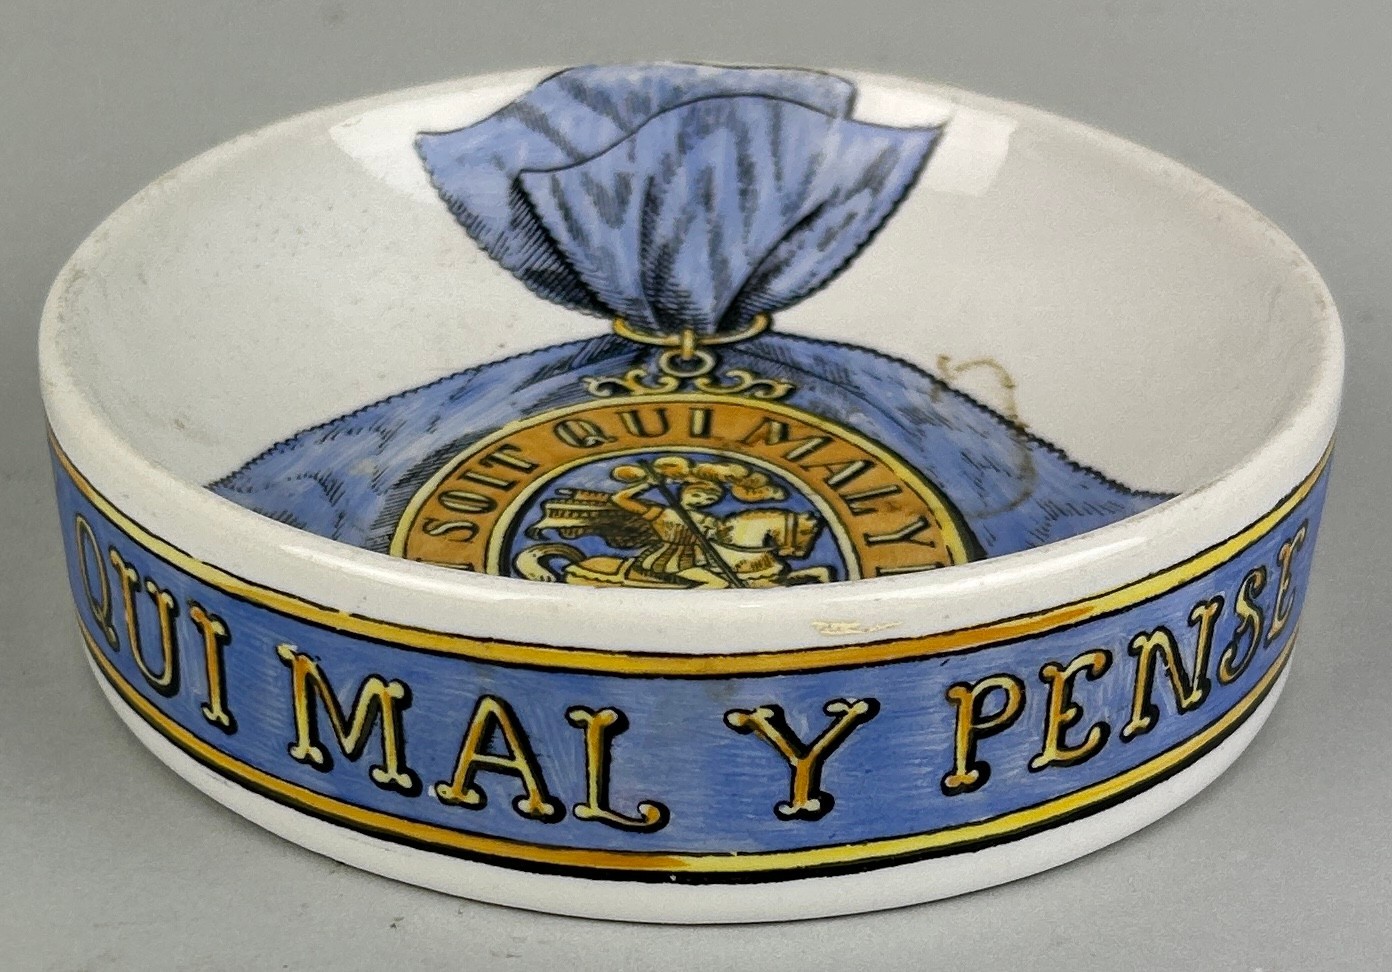 FORNASETTI MILANO: 'ORDER OF THE GARTER' ASHTRAY, Made in Italy. 13cm x 3cm - Image 2 of 4